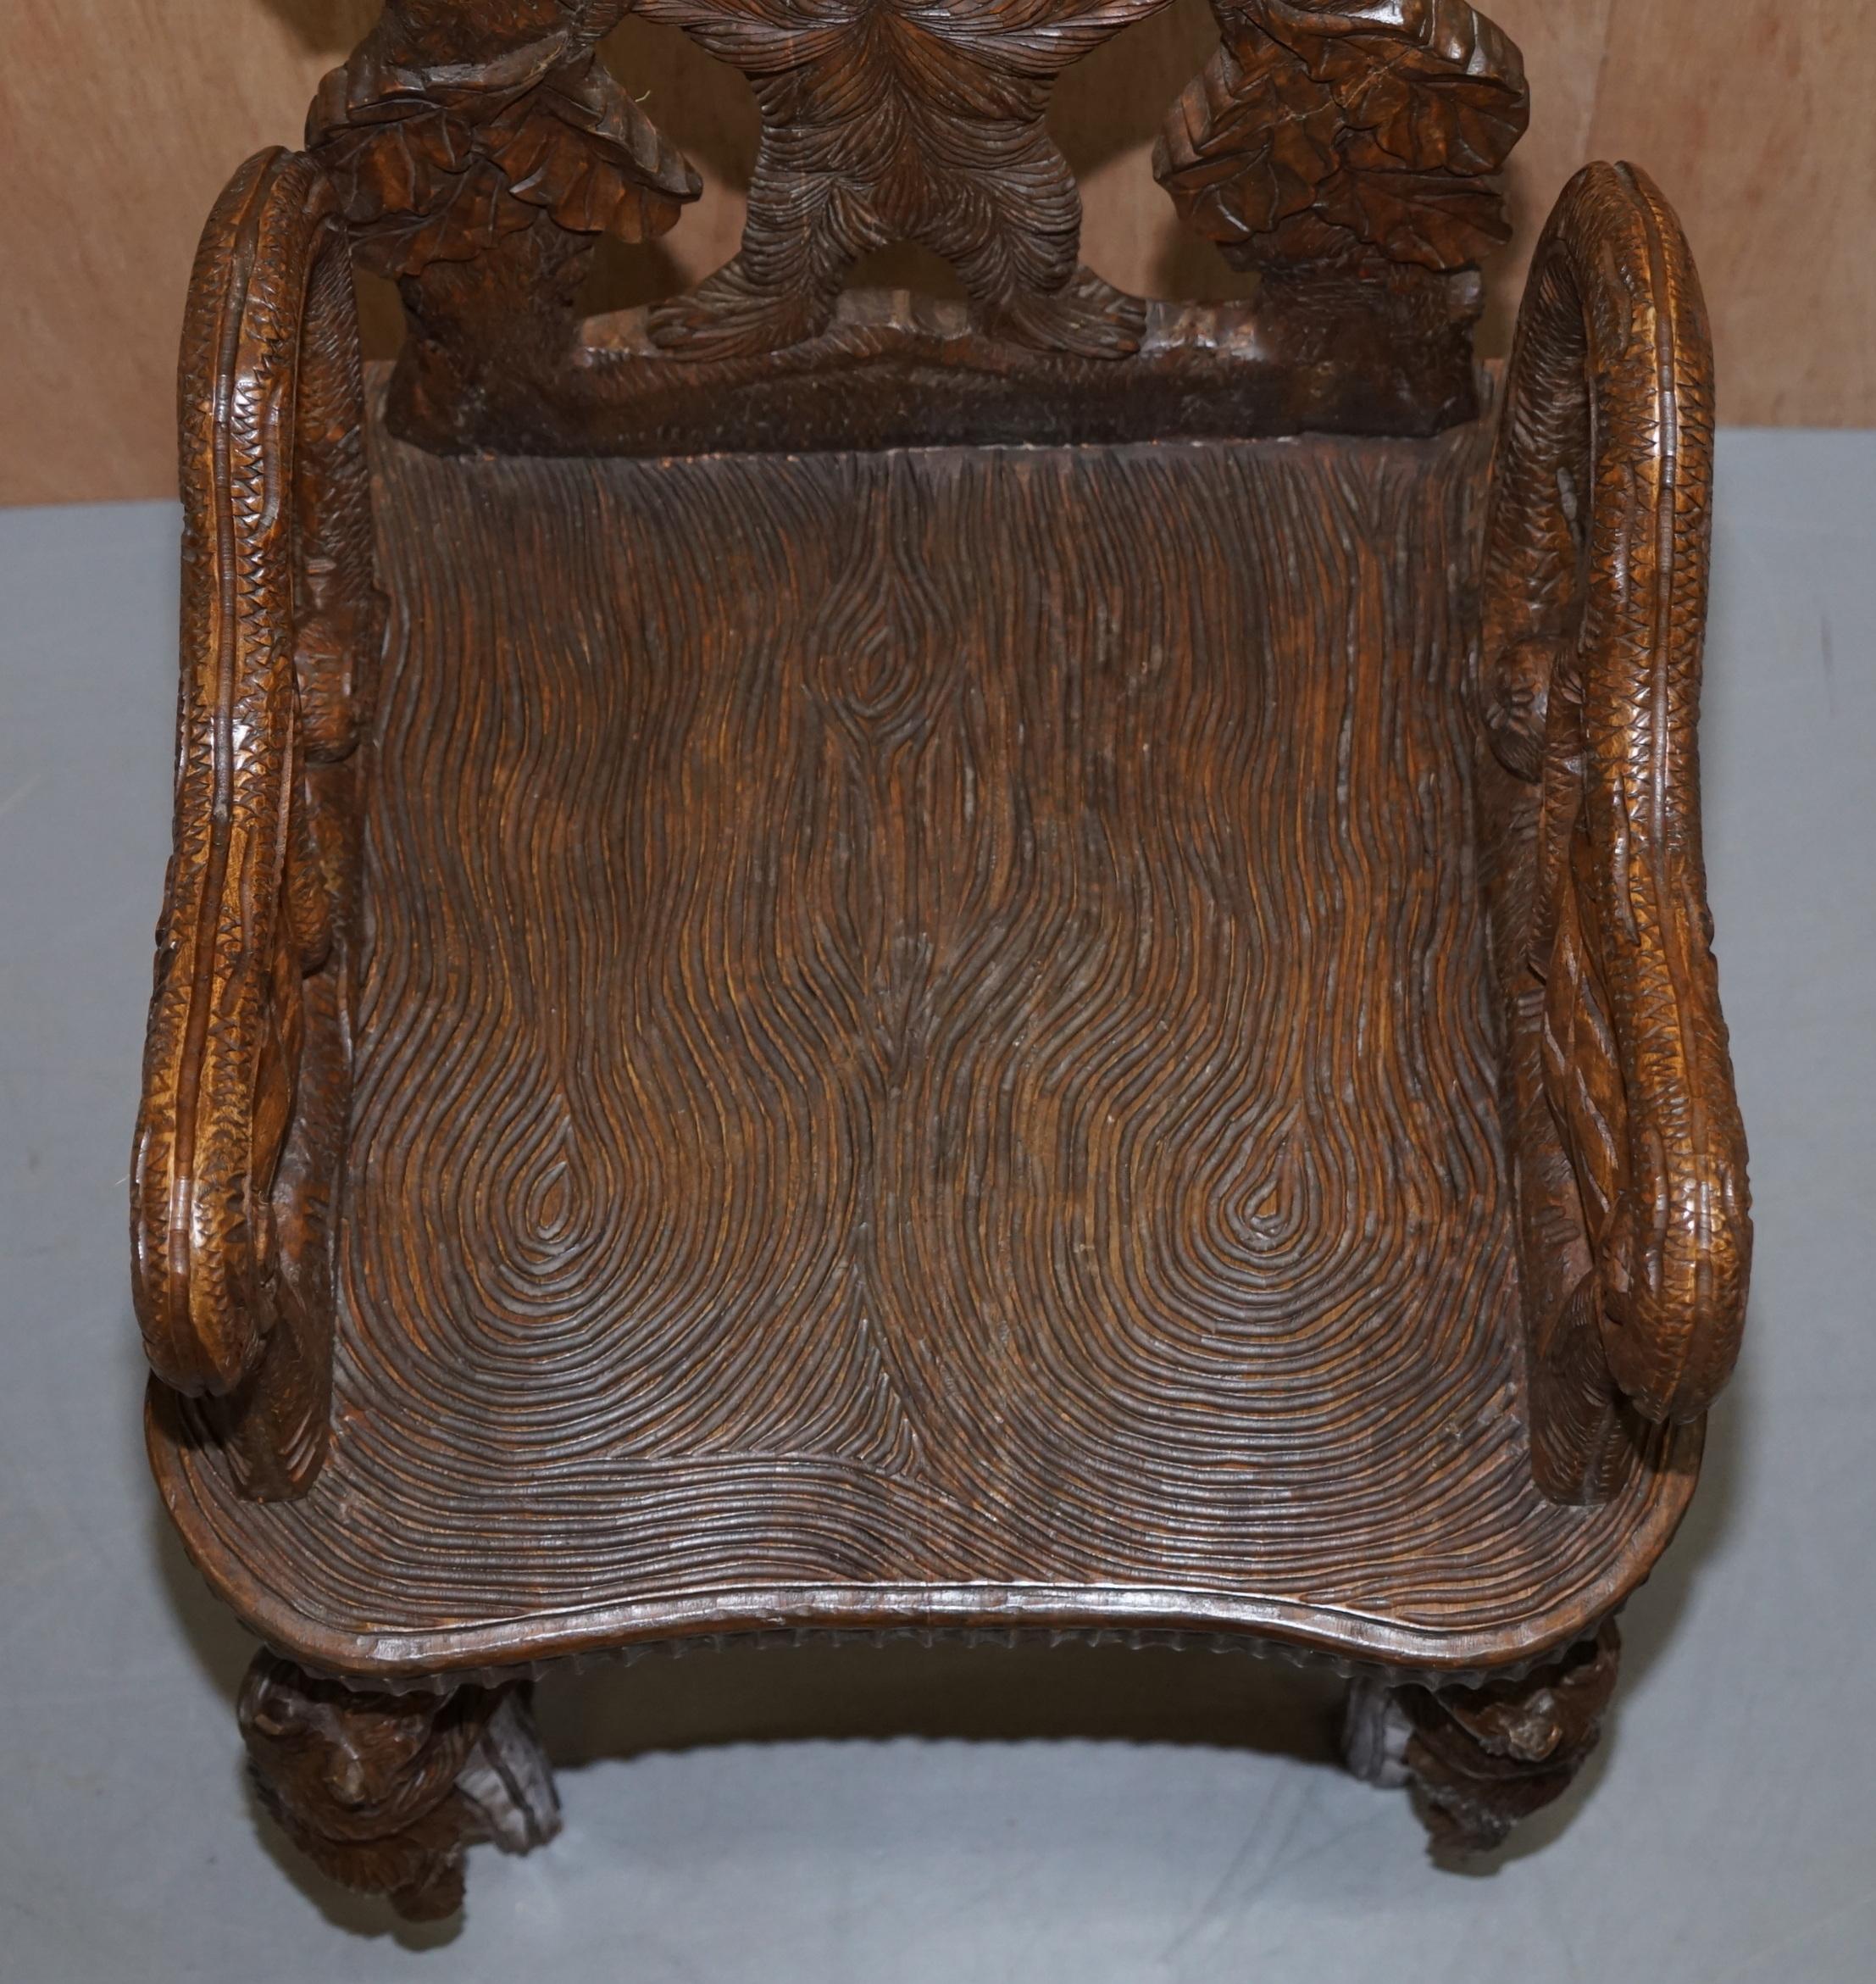 Vintage Hand Carved Black Forest Wood Bear Armchair with Bears Climbing the Legs 1